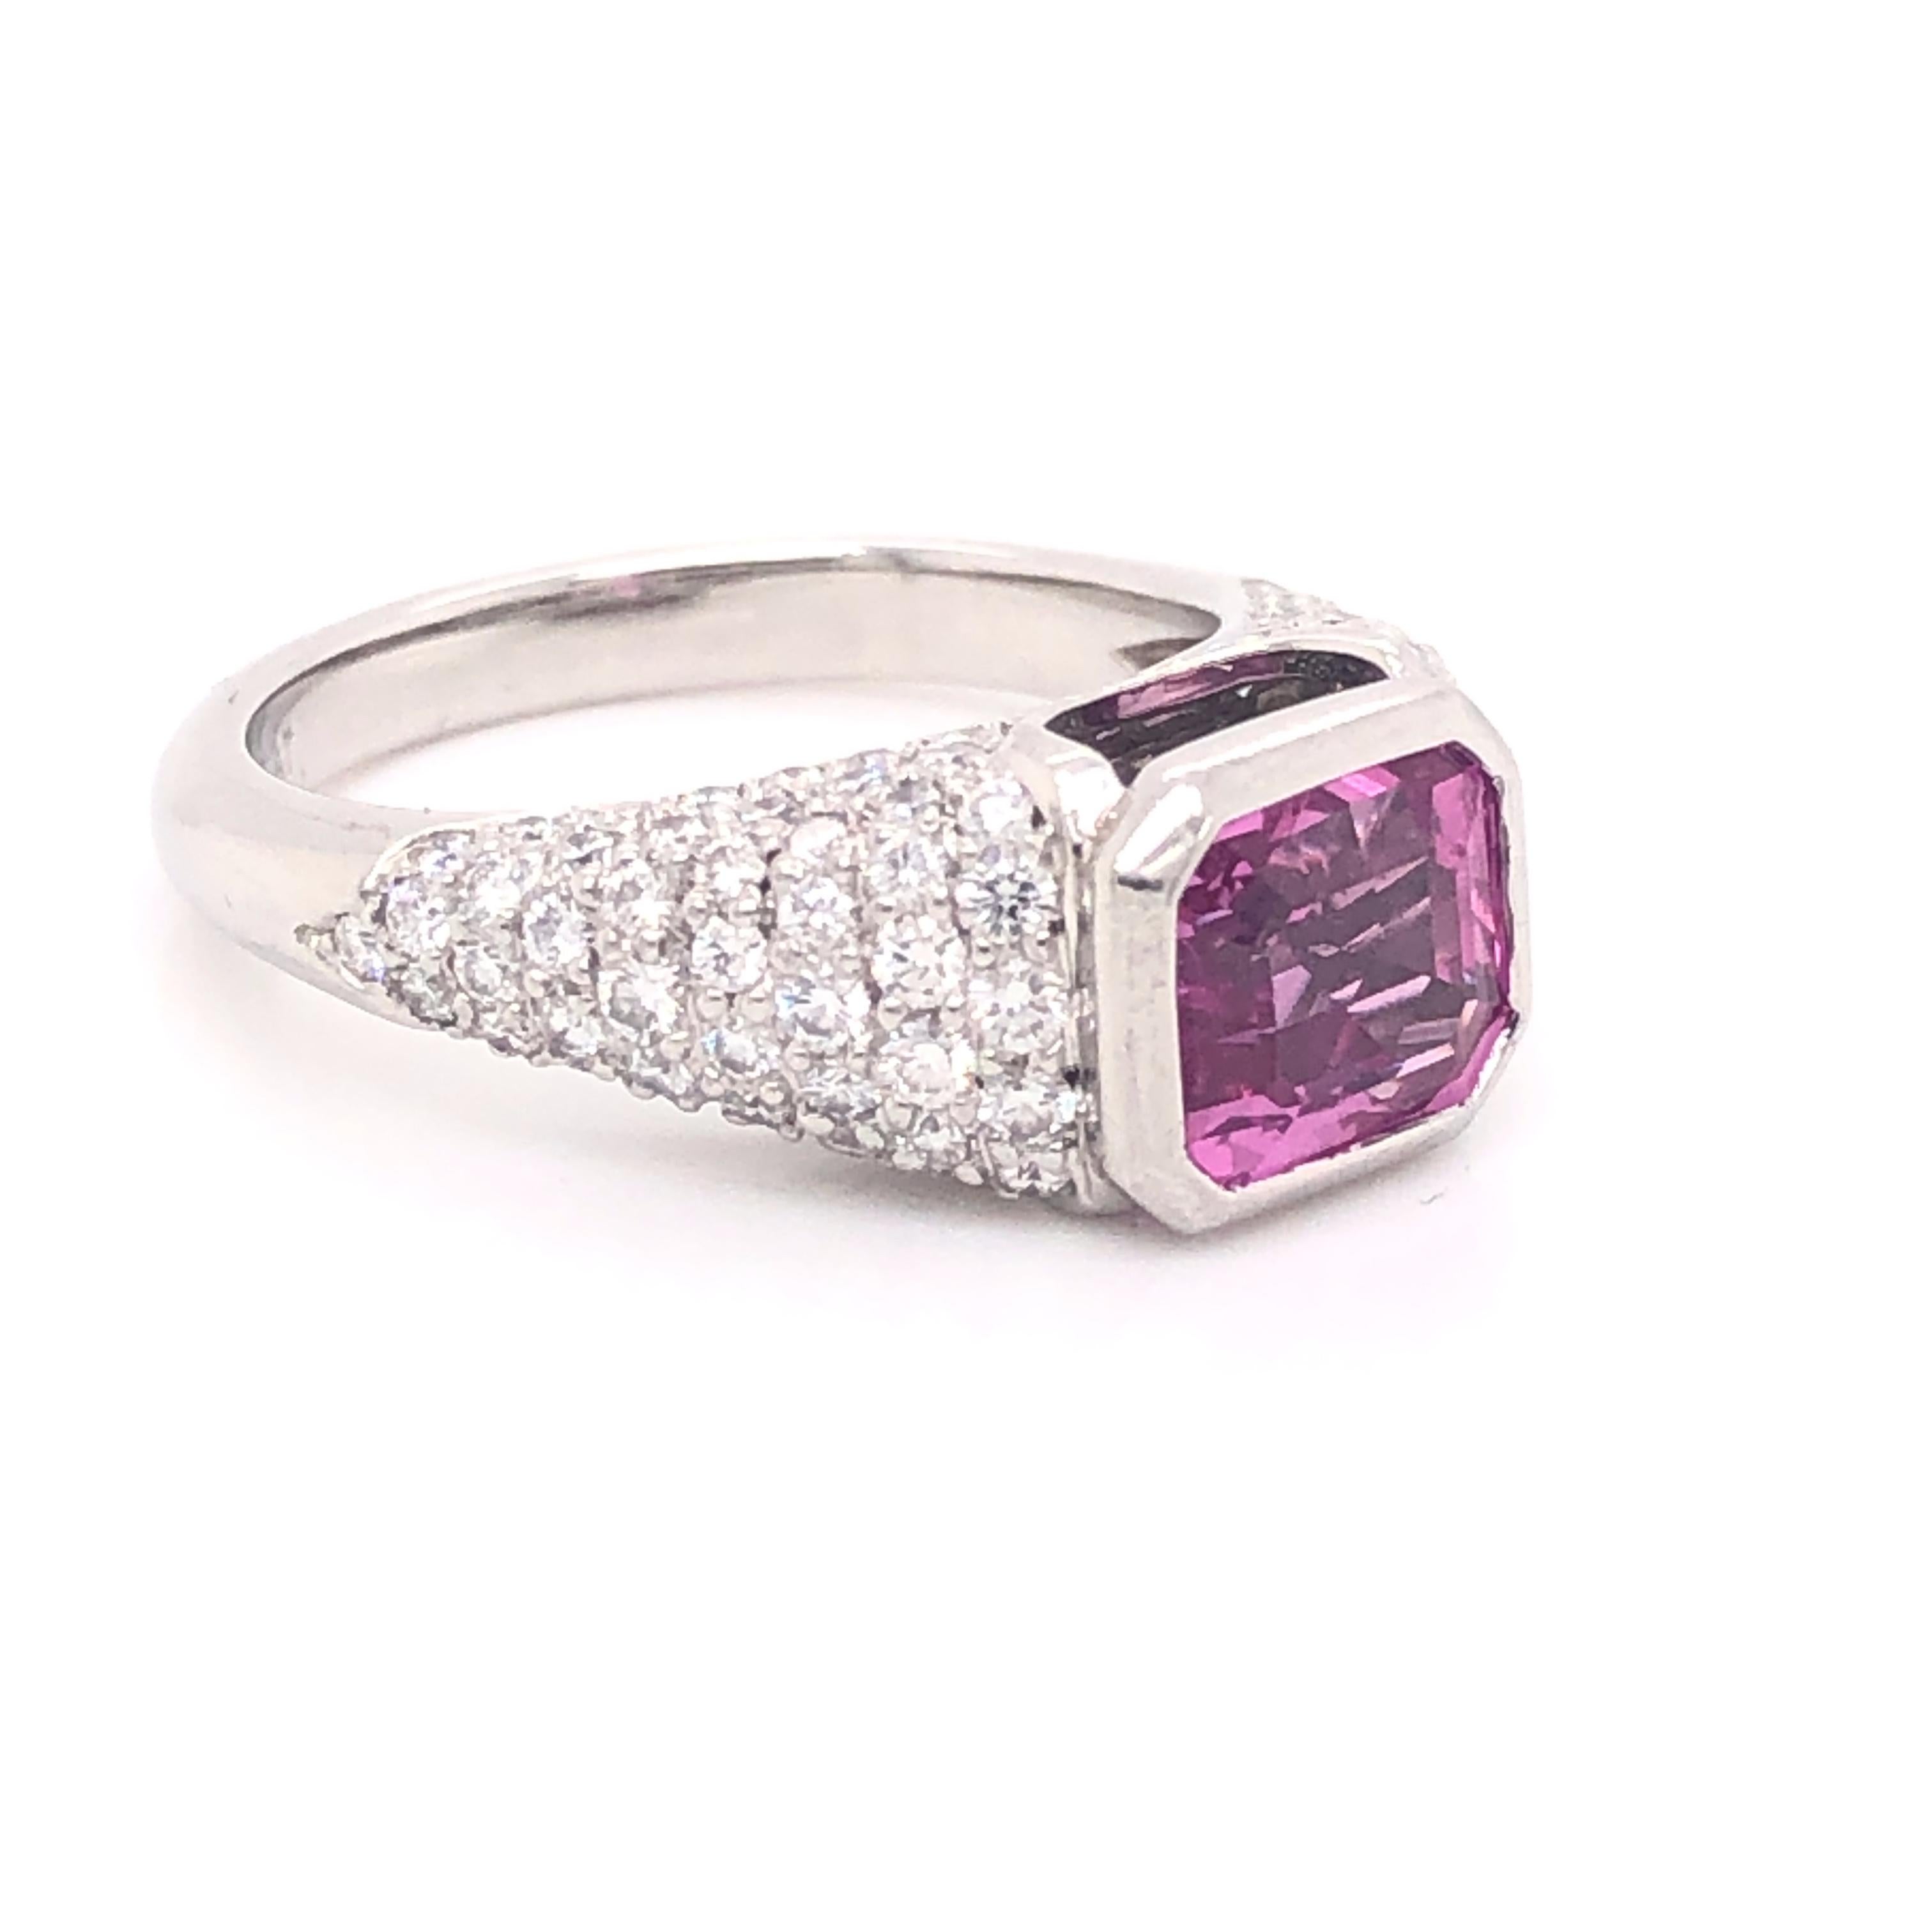 Beautiful ring crafted in platinum. This elegant design showcases a Pink Sapphire with a rich deep color. The design of the ring truly flows as this ring was custom made for this beautiful gemstone. The pink sapphire is a emerald cut gemstone set in